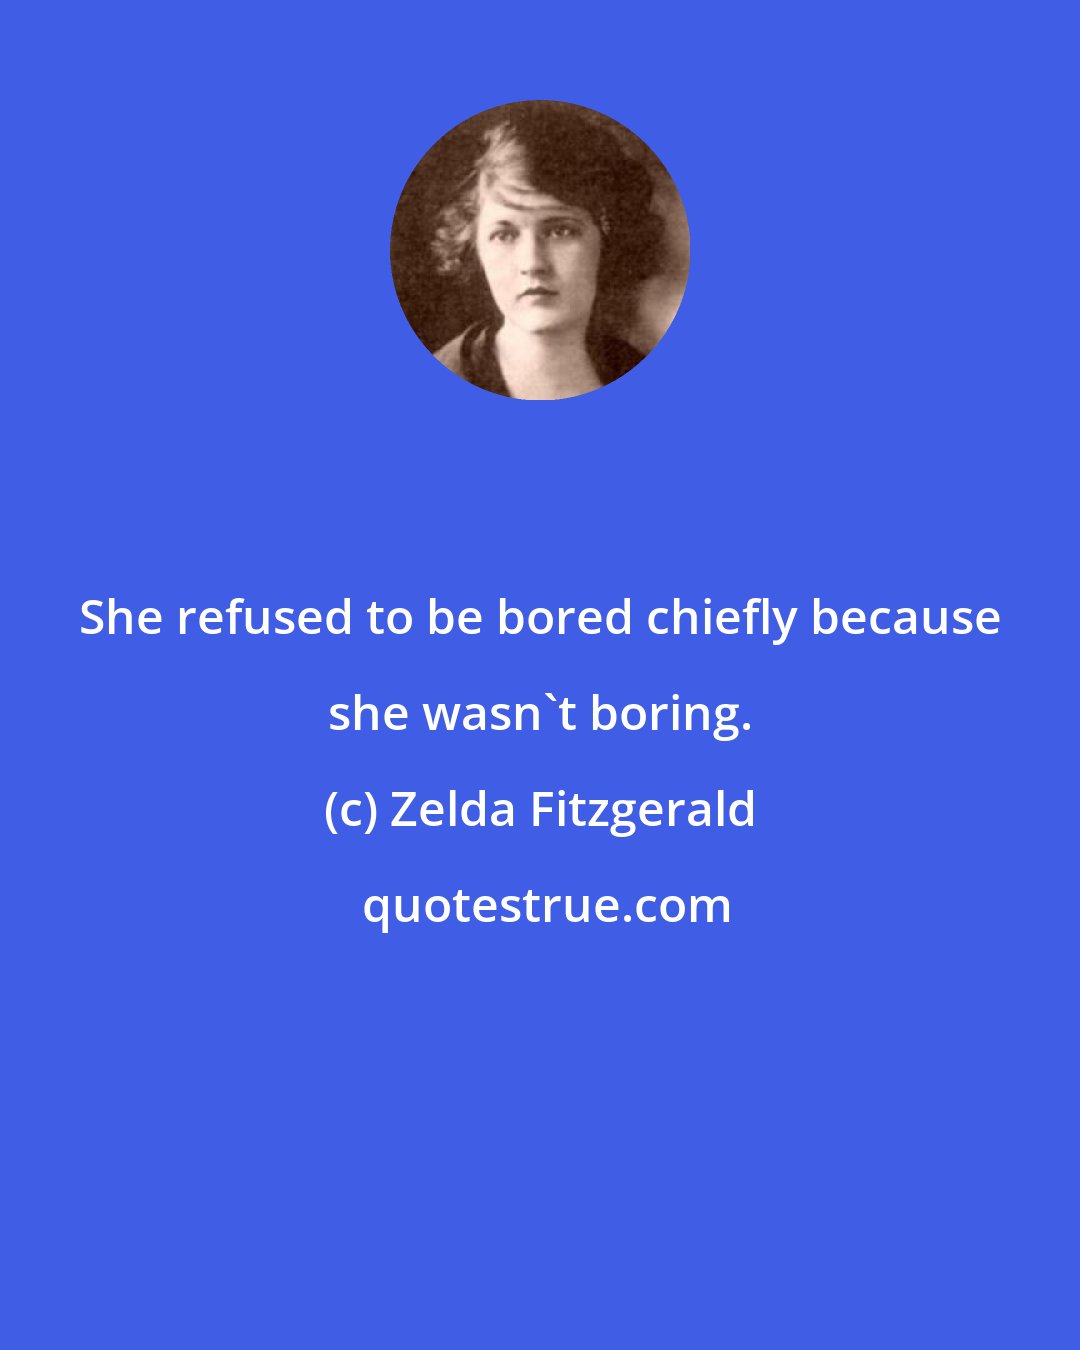 Zelda Fitzgerald: She refused to be bored chiefly because she wasn't boring.